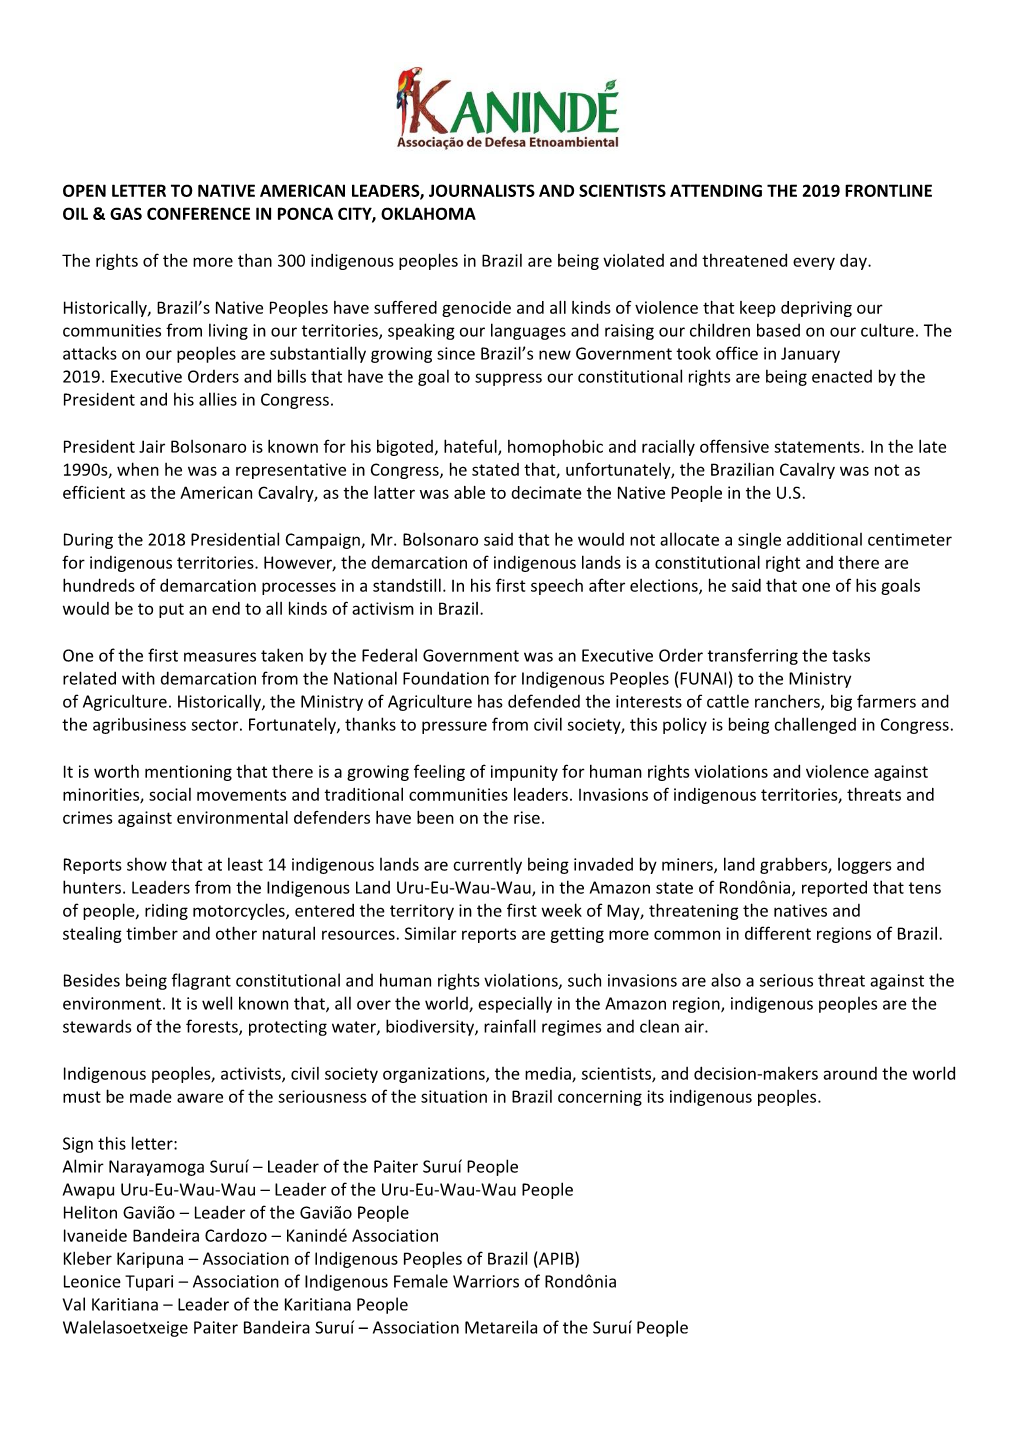 Open Letter to Native American Leaders, Journalists and Scientists Attending the 2019 Frontline Oil & Gas Conference in Ponca City, Oklahoma